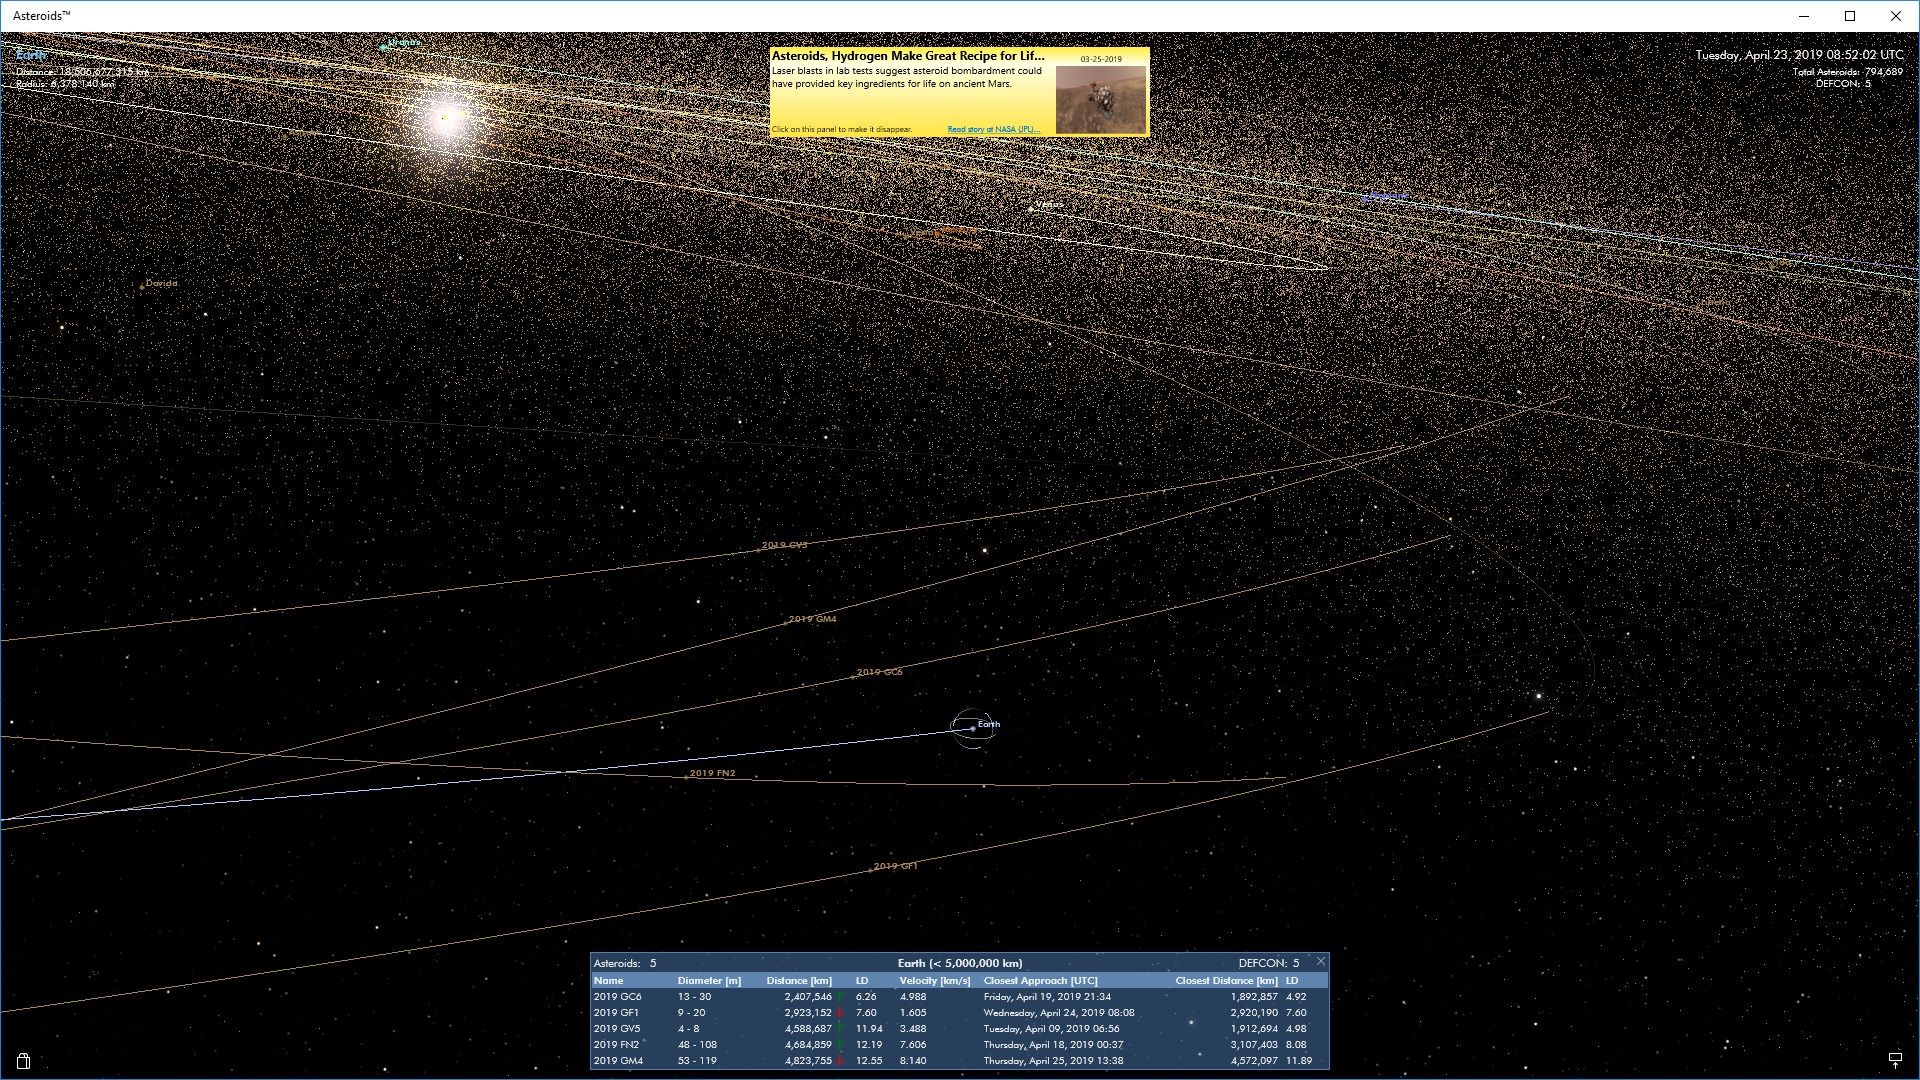 Asteroids™ - Earth & Near Earth Objects (NEOs)